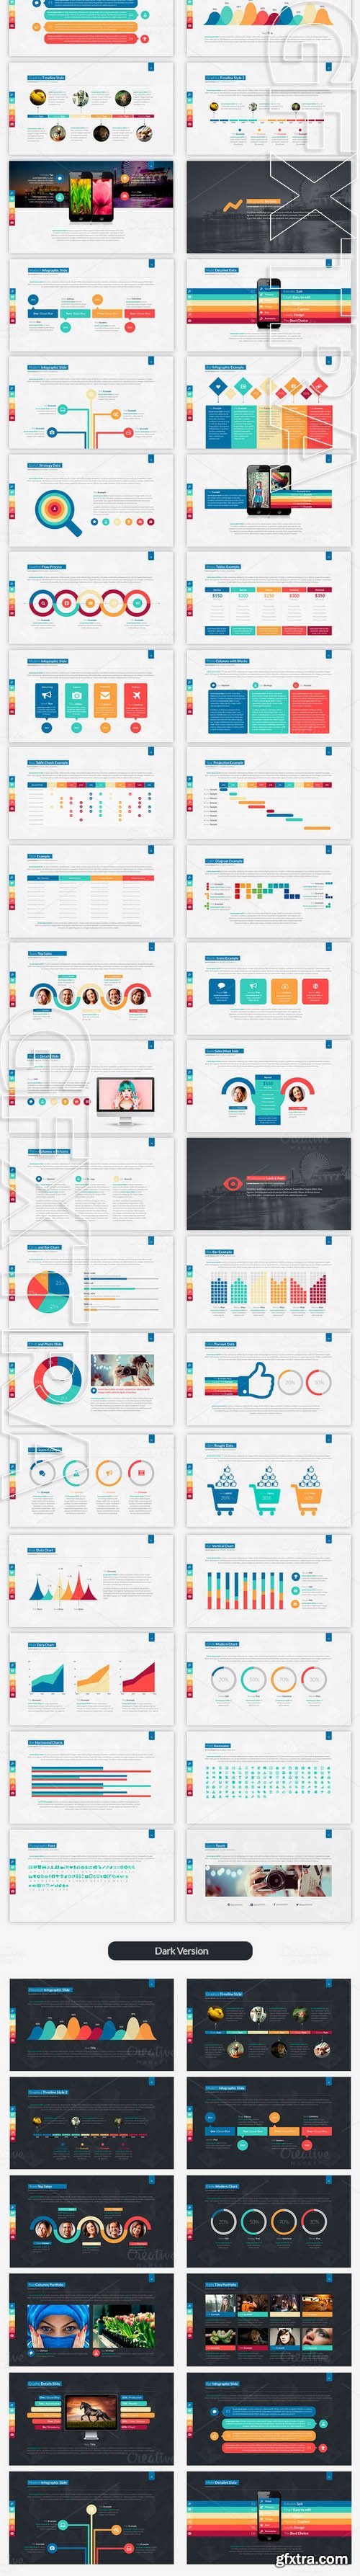 Social Counter | Powerpoint Template - CM 248565